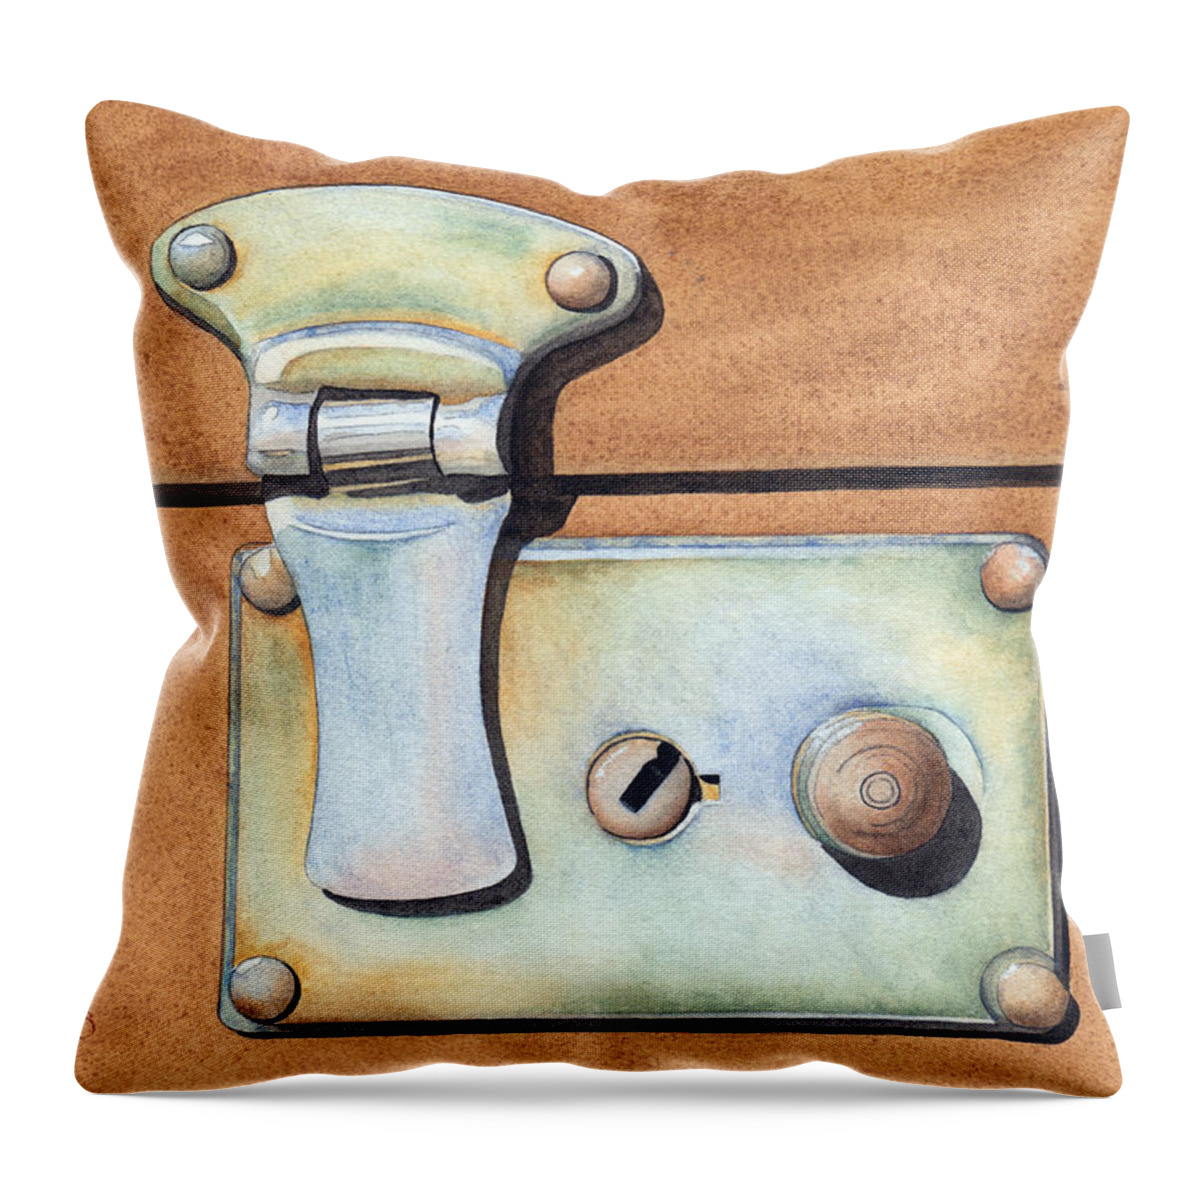 Case Throw Pillow featuring the painting Case Latch by Ken Powers